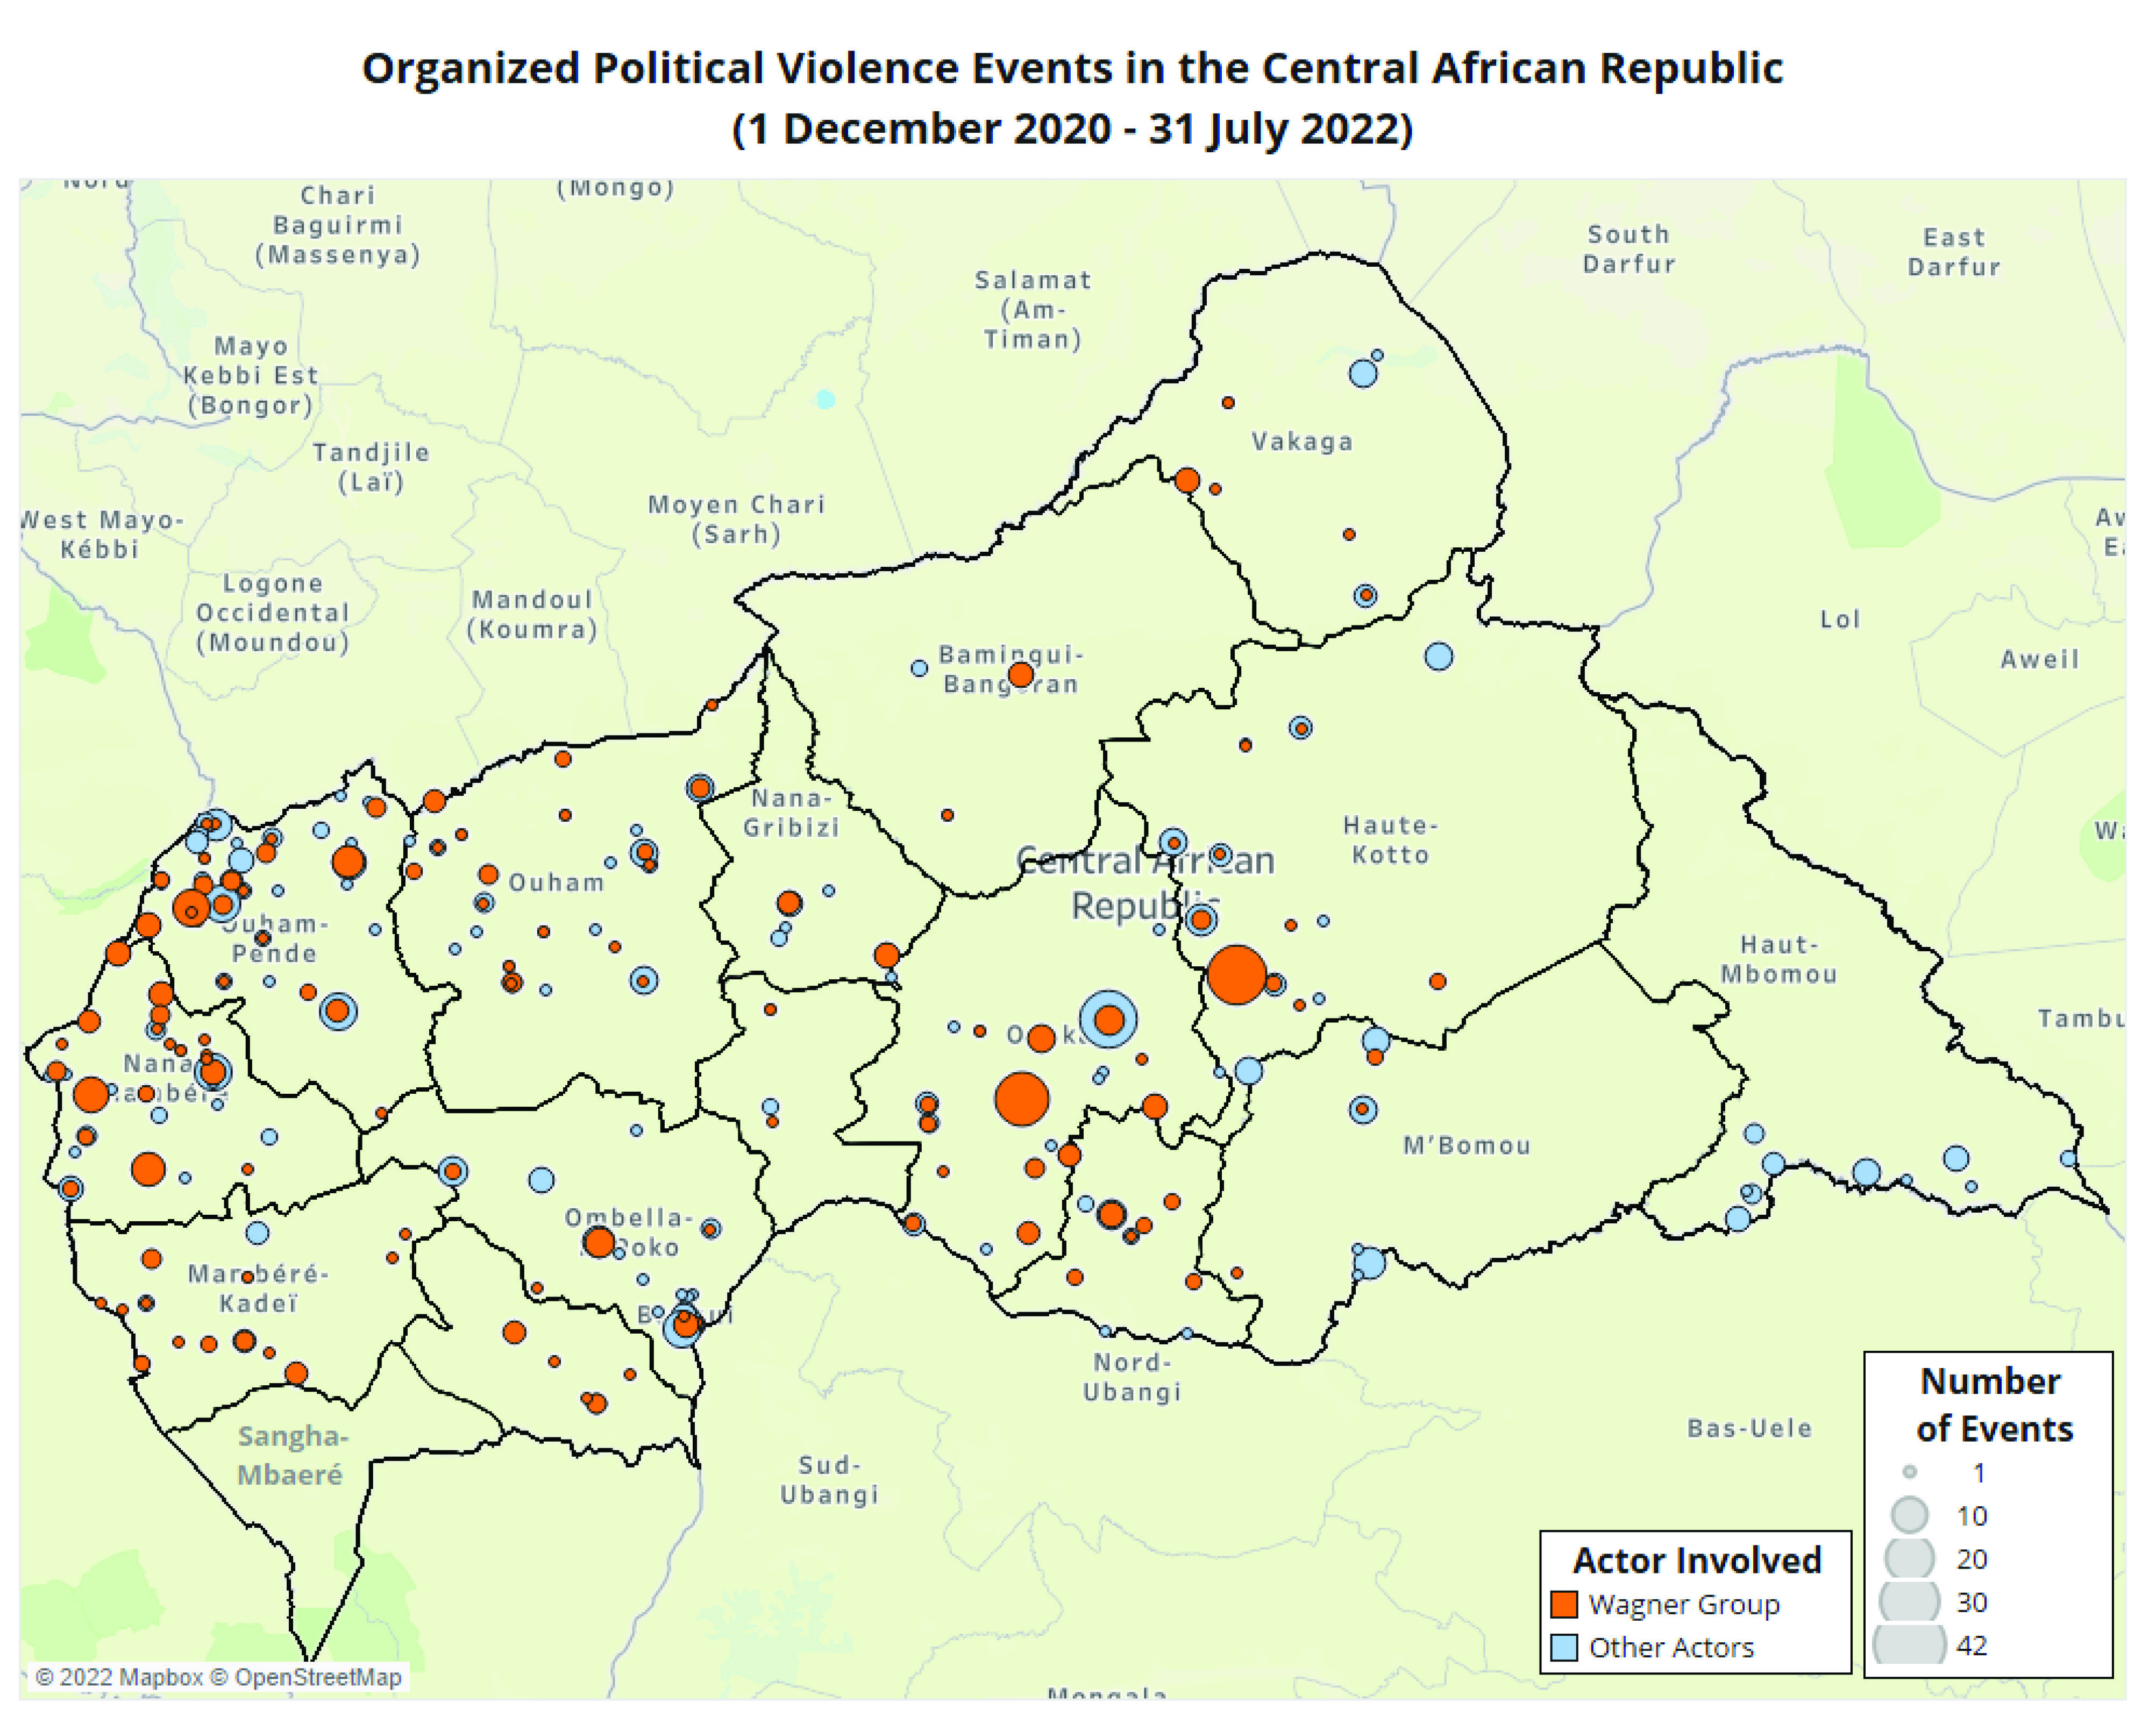 Organized Political Violence Events in the Central African Republic (1 December 2020 – 31 July 2022)
